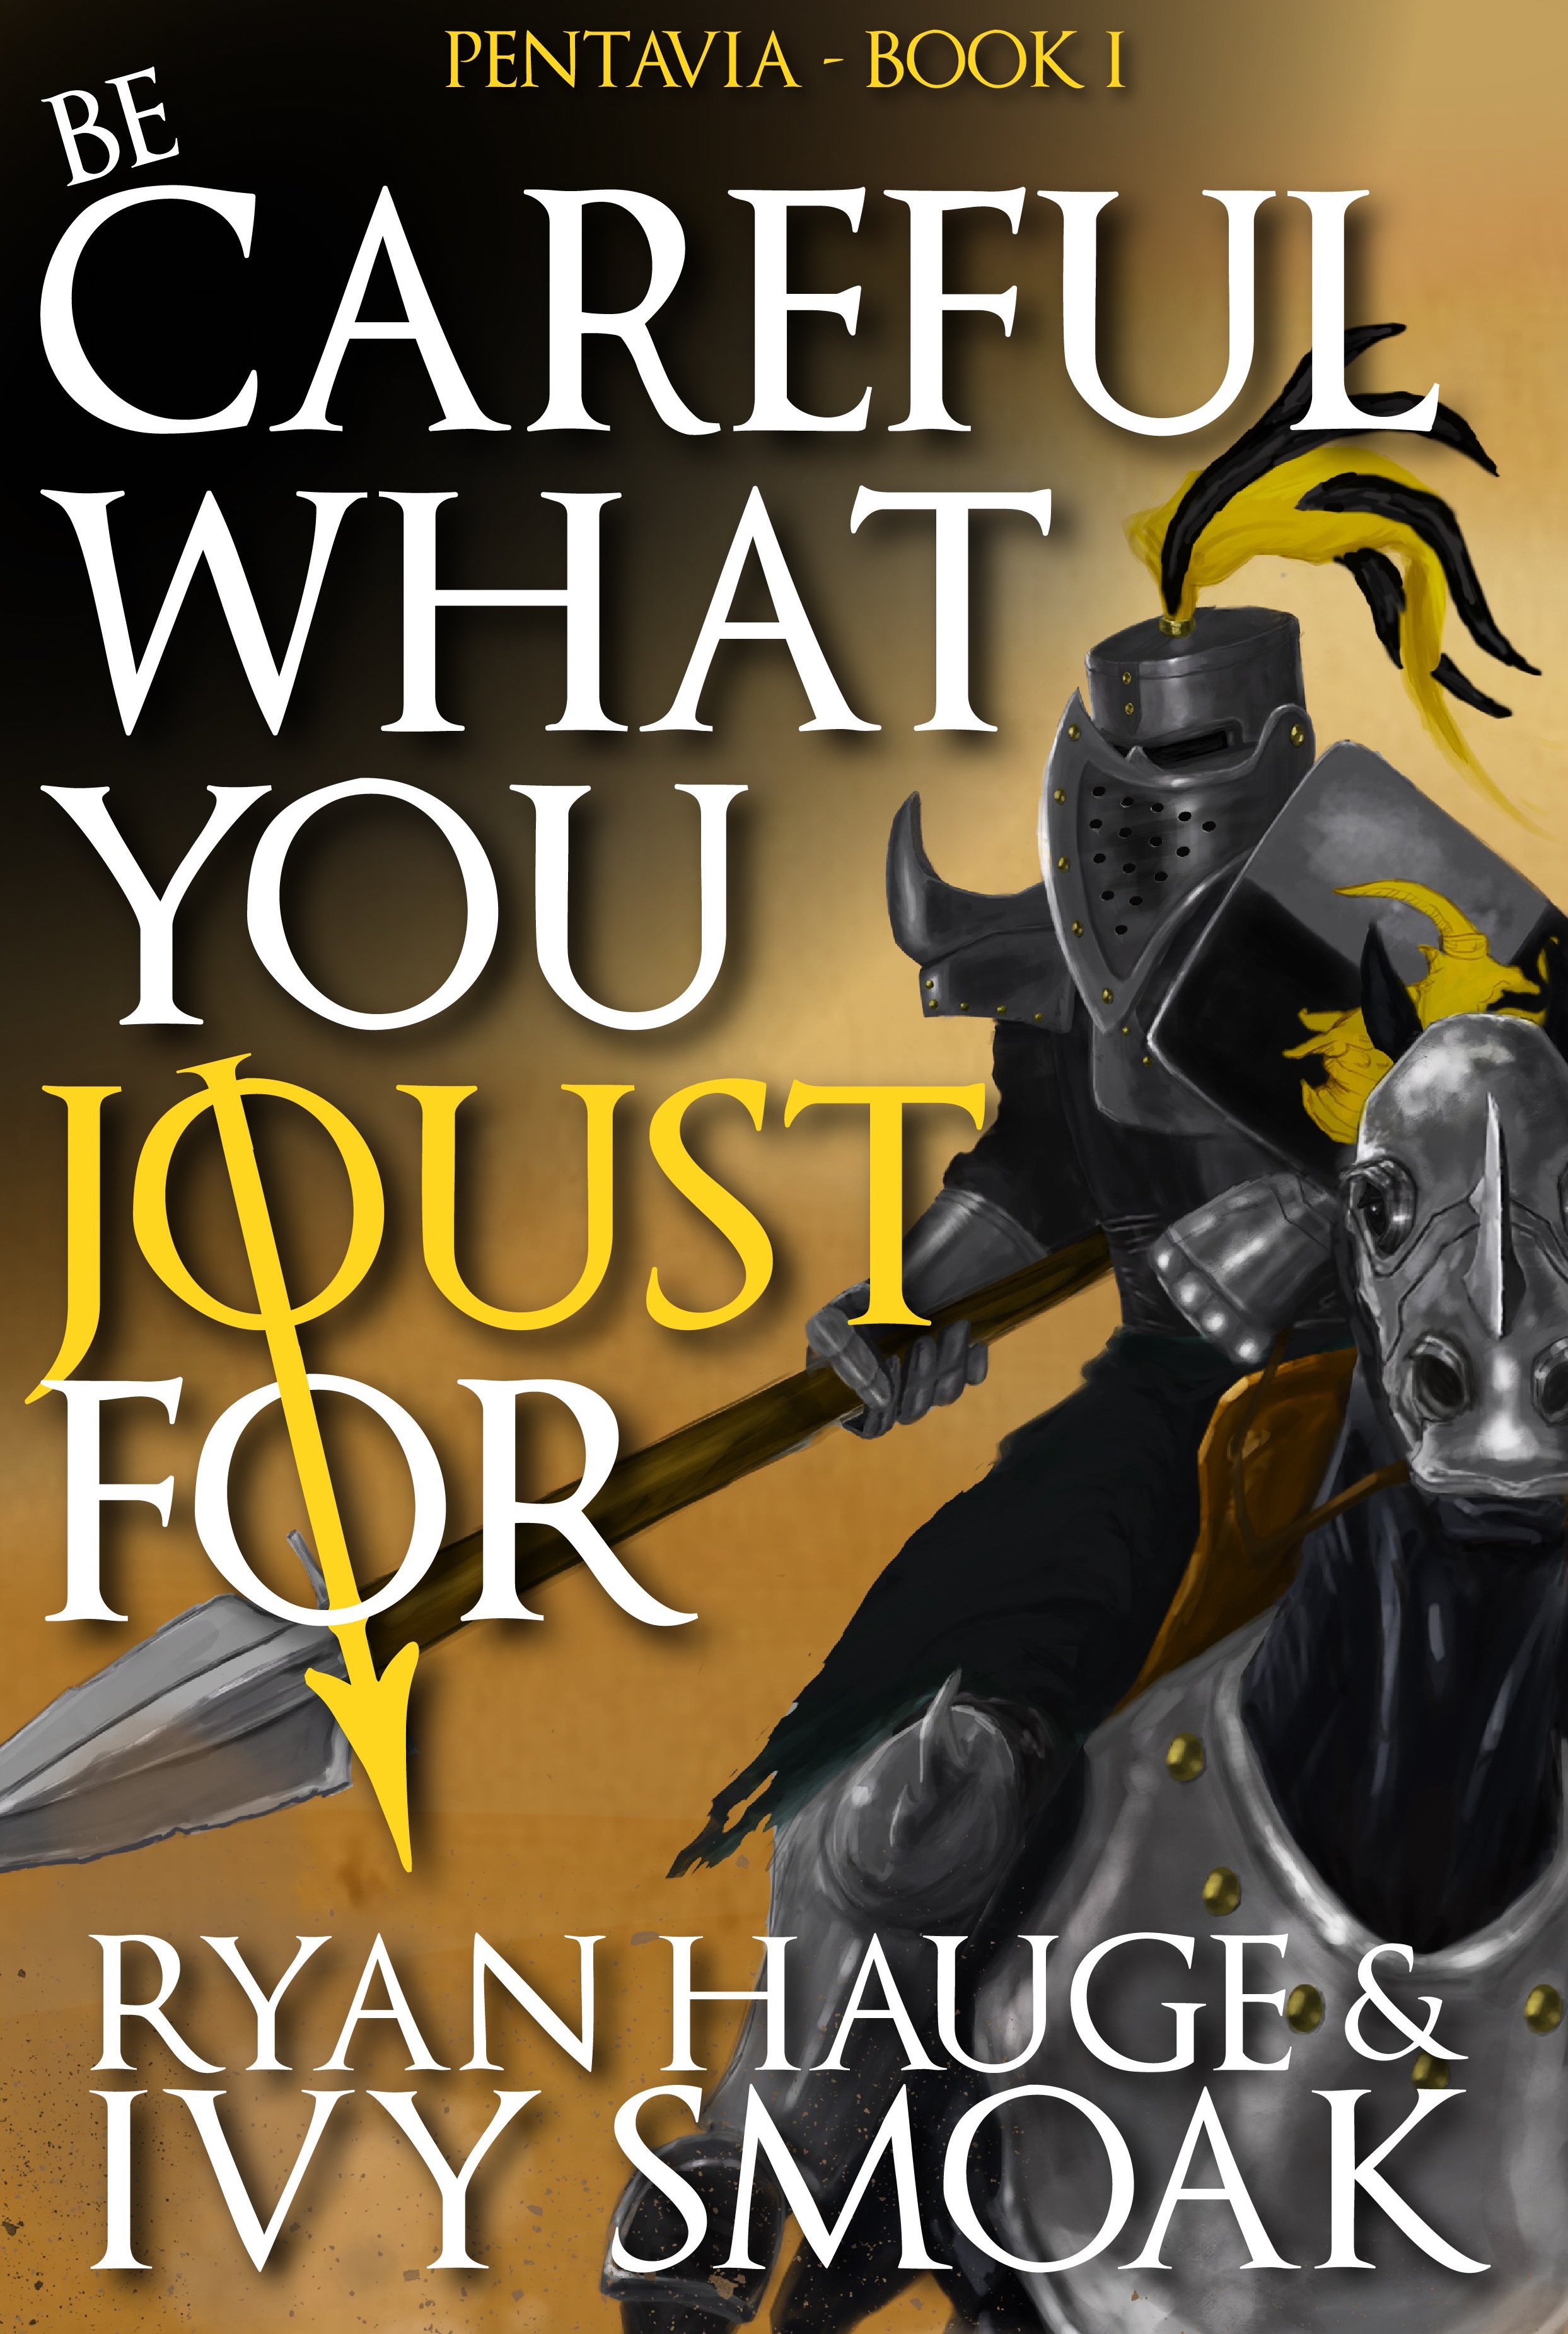 Be Careful What You Joust For